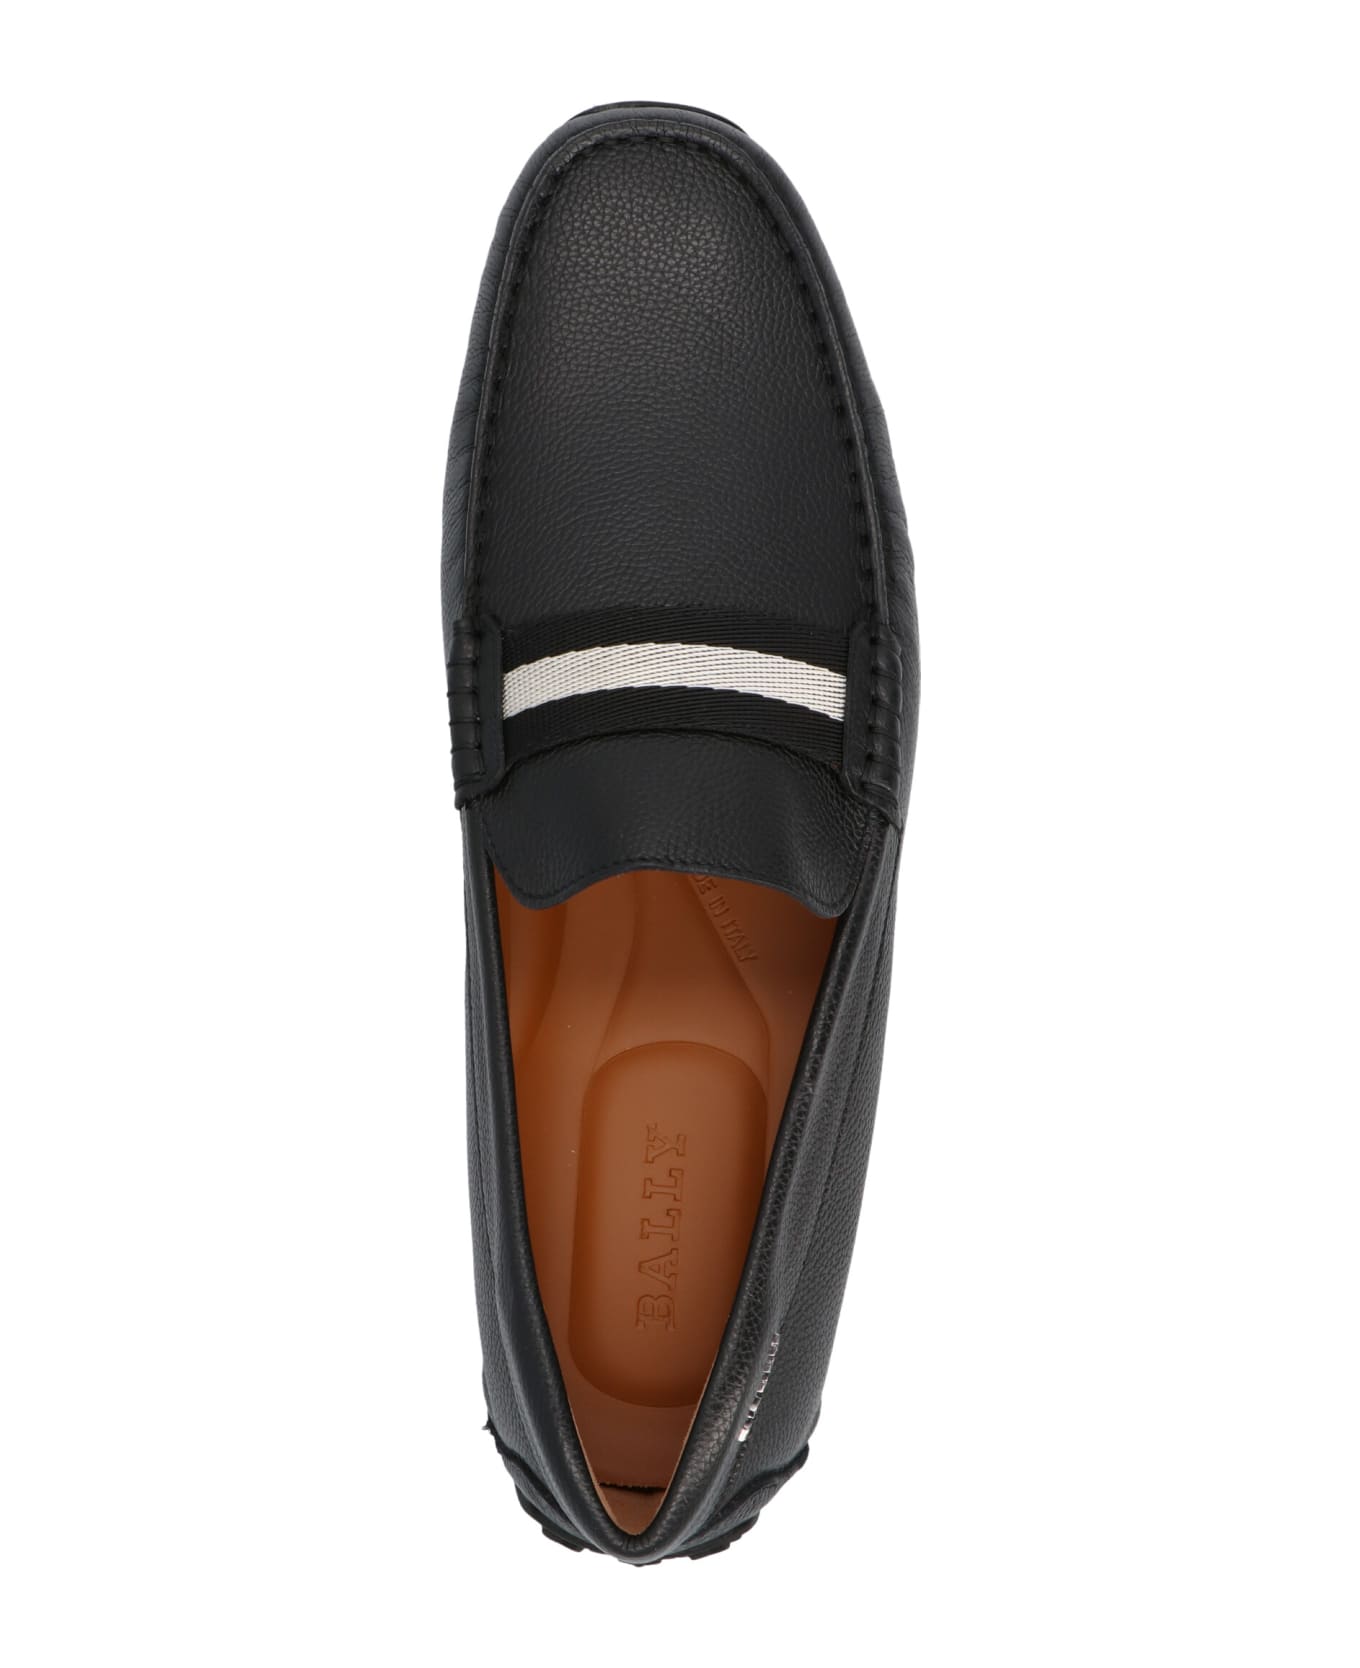 Bally 'pearce Loafers - Black